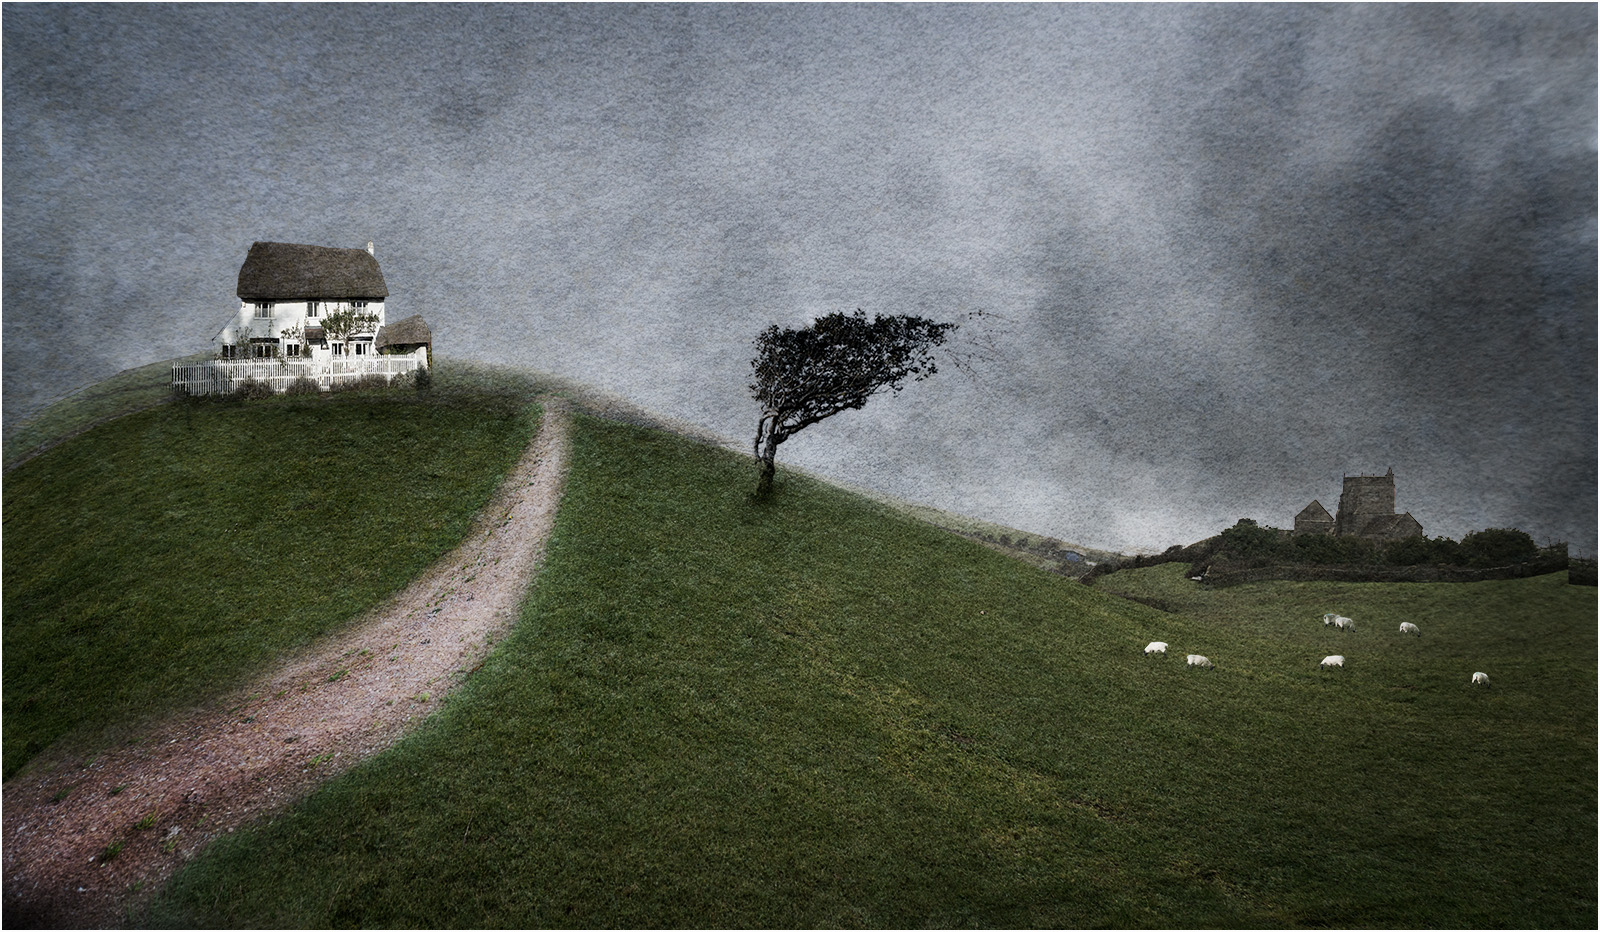 9. The House On The Hill By Roger Dixey ARPS DPAGB